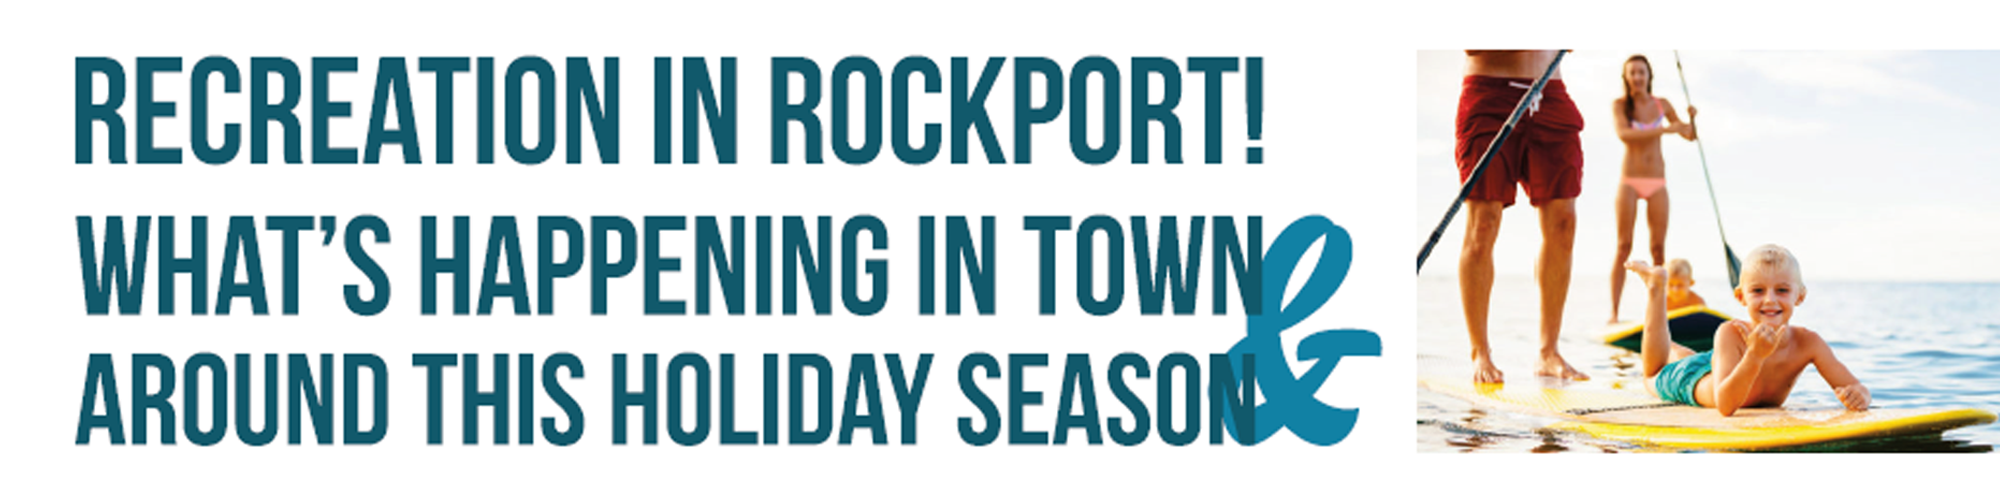 Recreation In Rockport! What’s Happening In Town And Around This Holiday Season